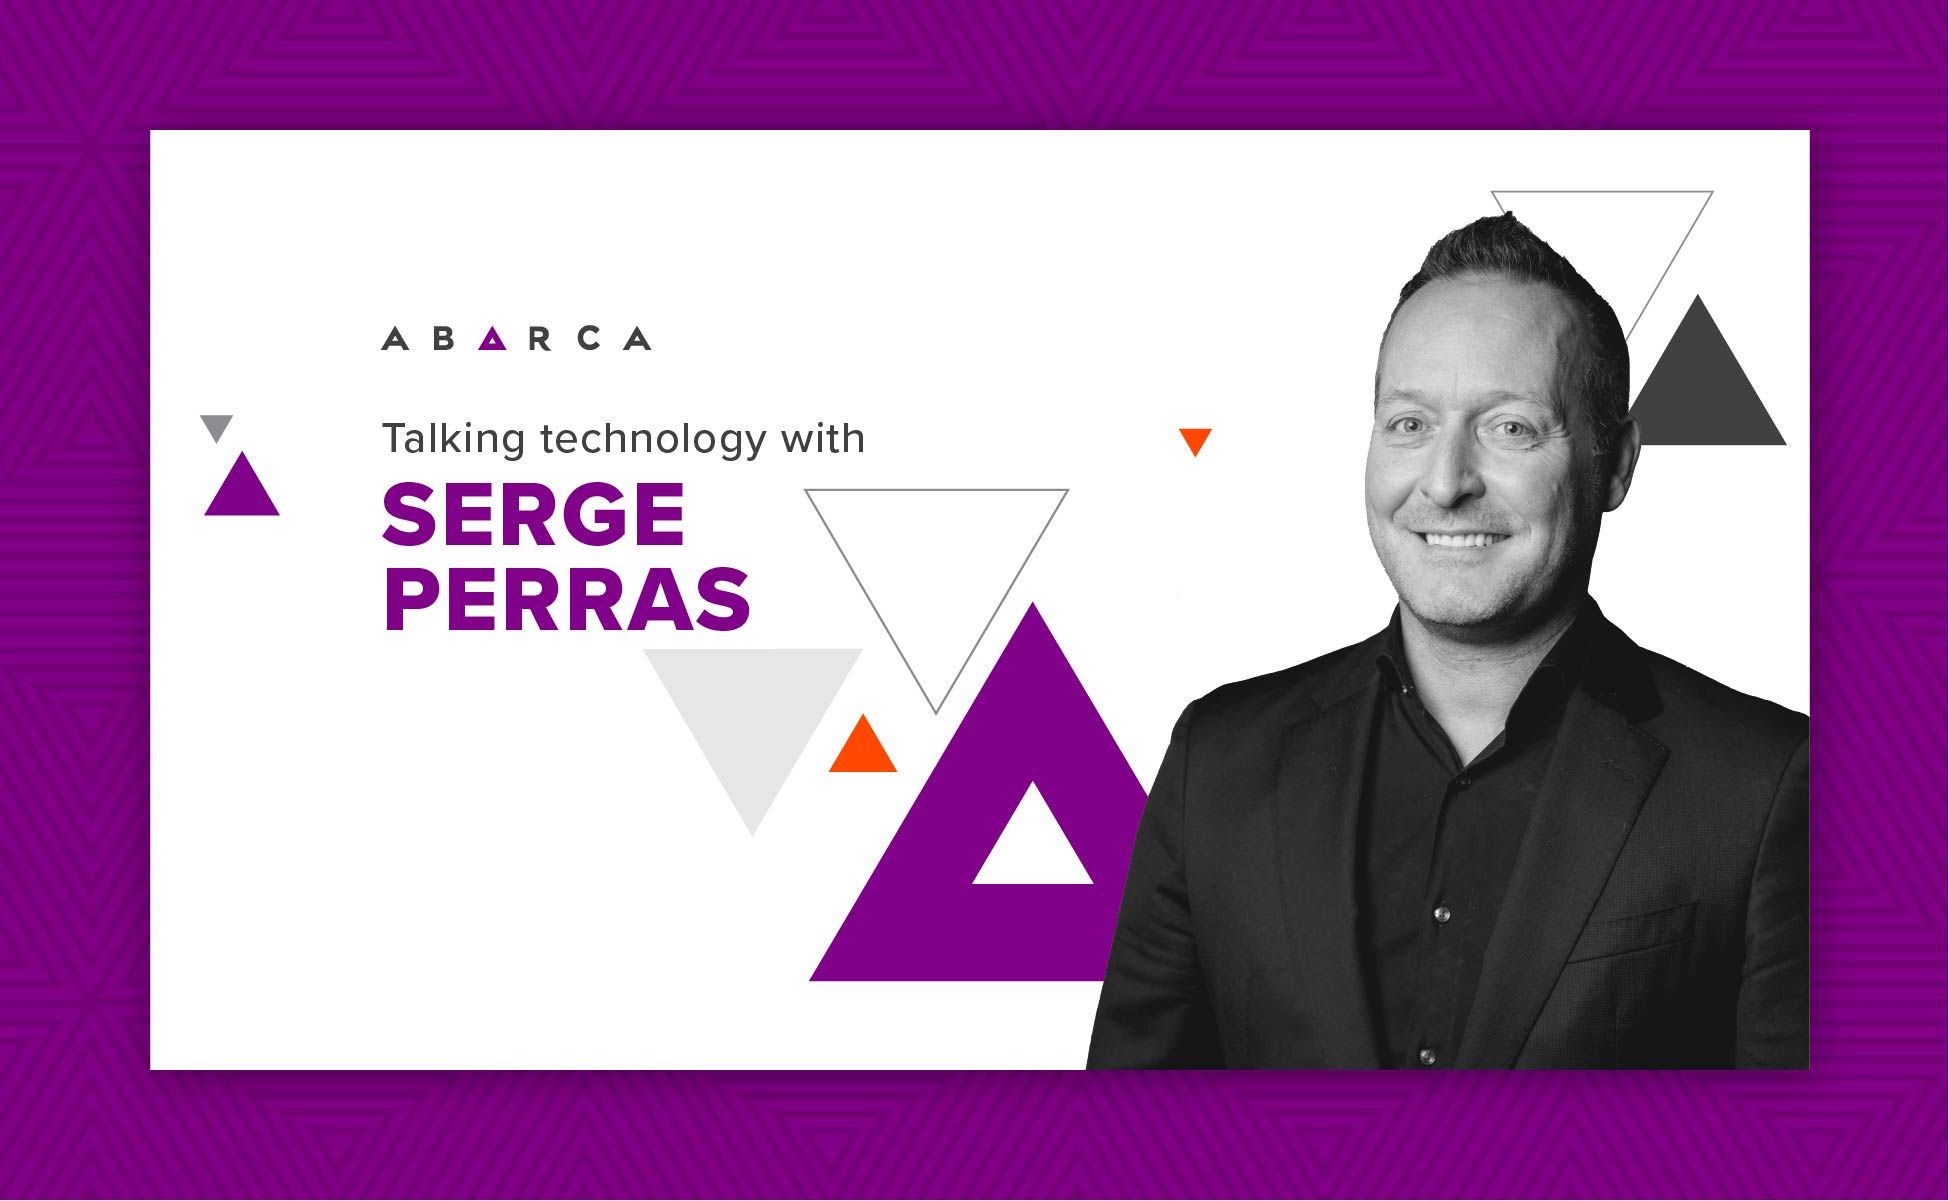 Talking technology with Abarca CIO Serge Perras